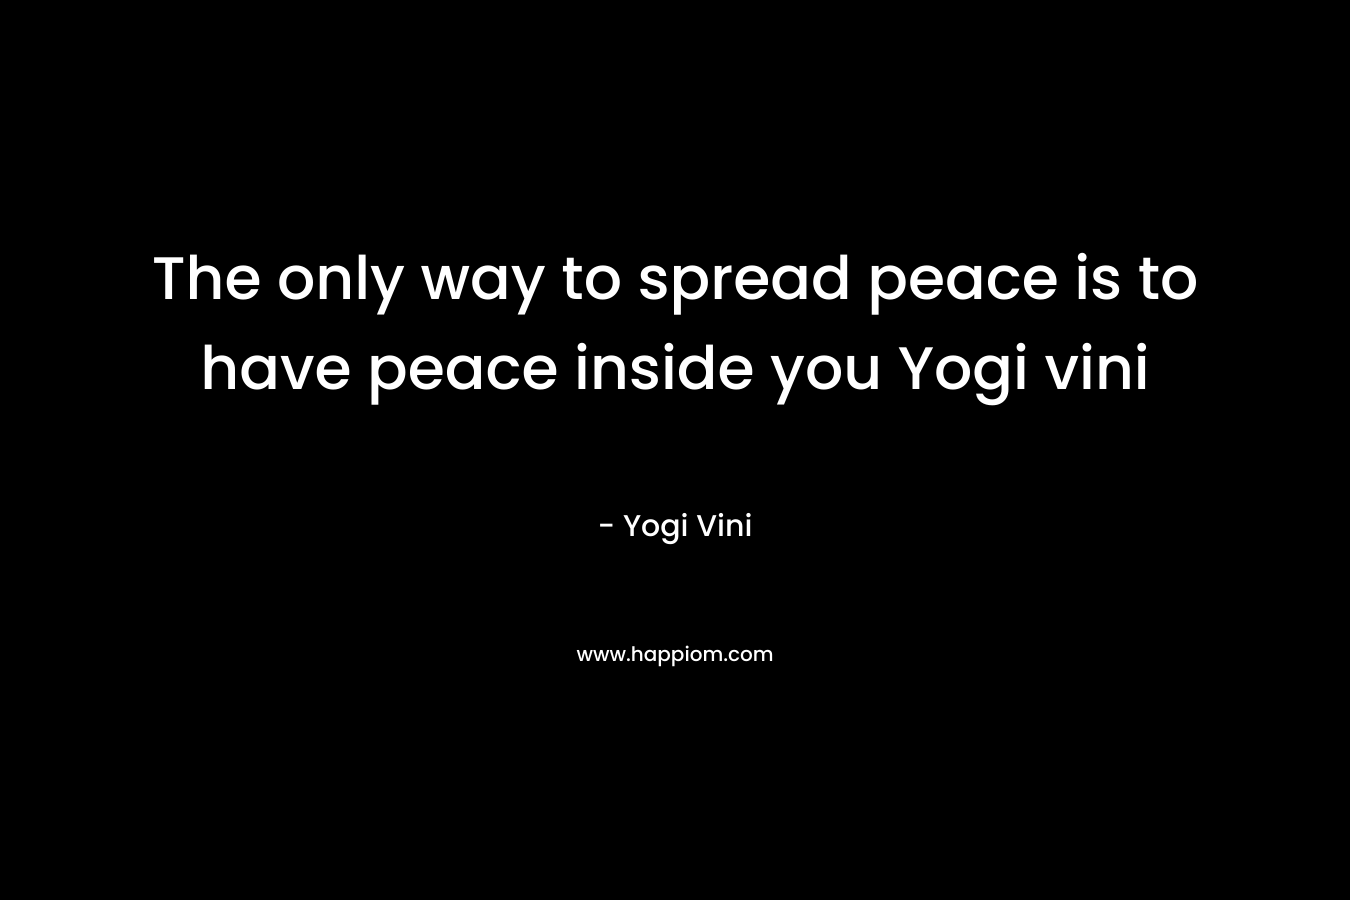 The only way to spread peace is to have peace inside you  Yogi vini – Yogi Vini